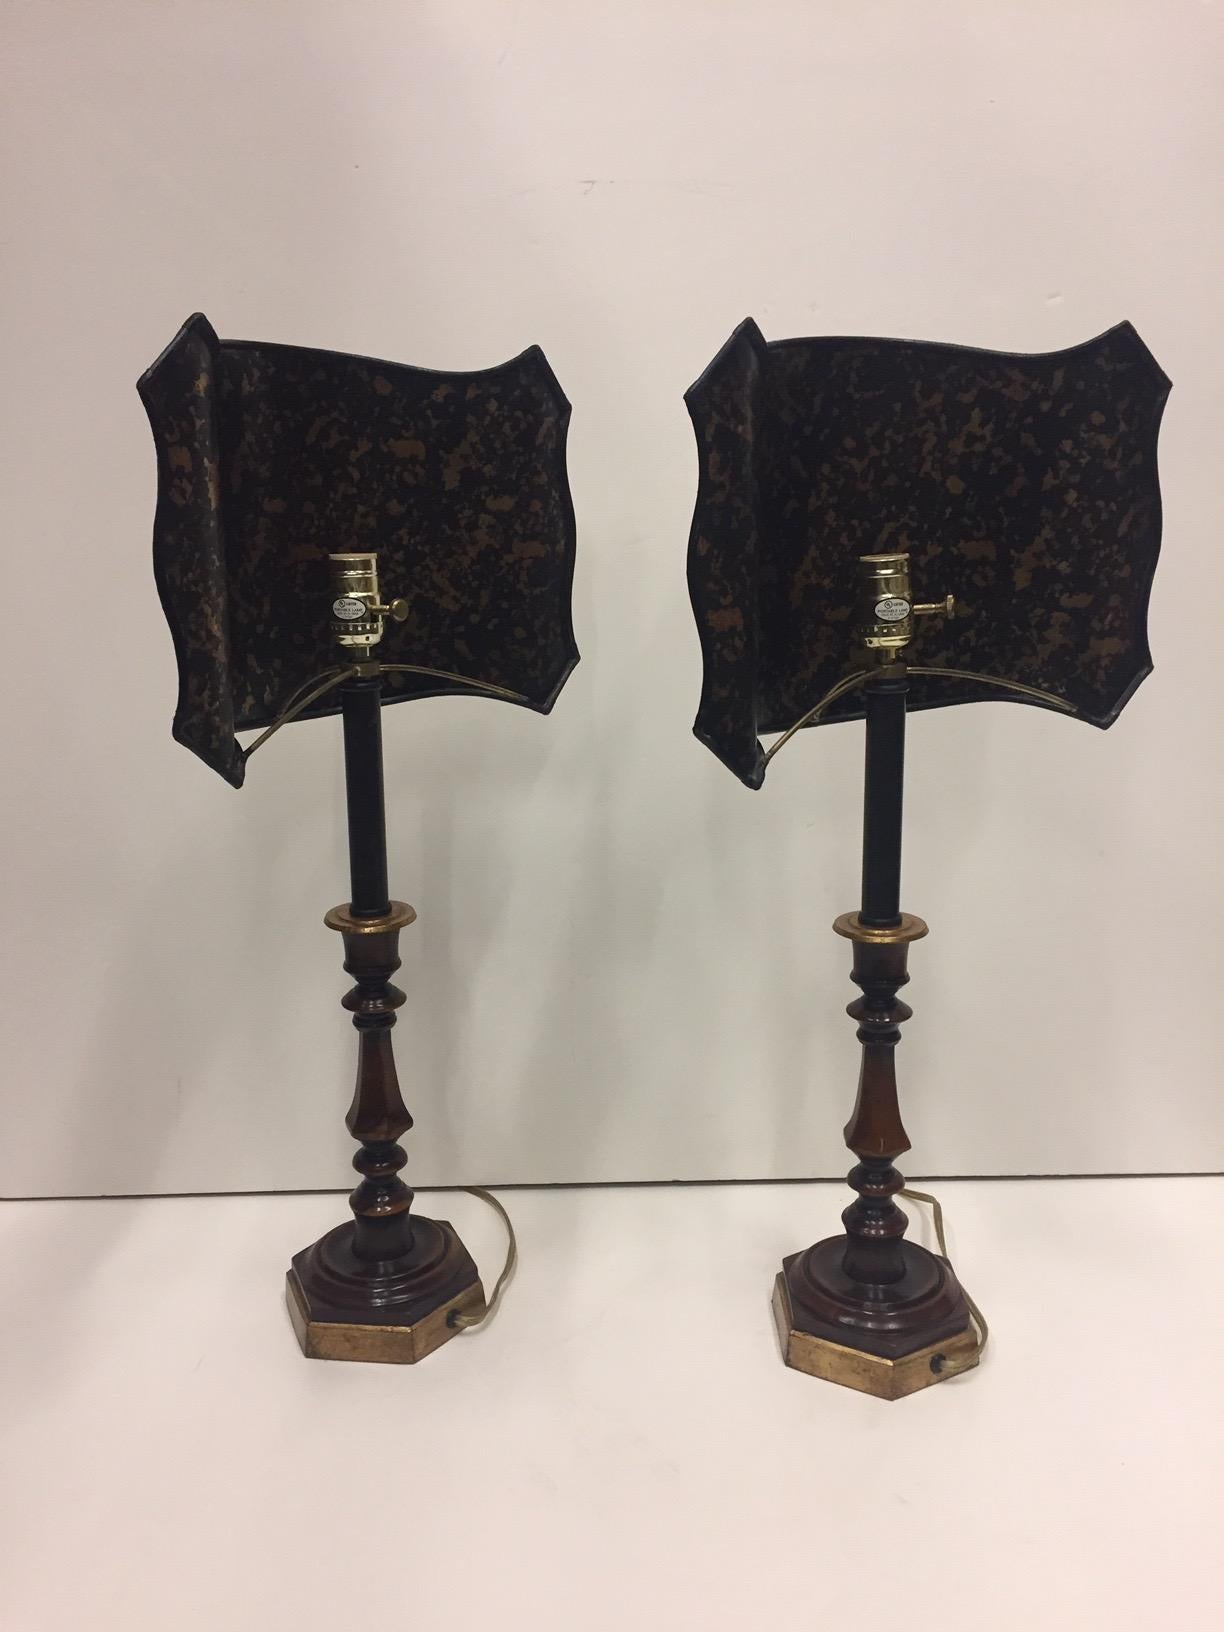 Wonderful Pair of Dark Red Candlestick Table Lamps with Fancy Decoupage Shades 5